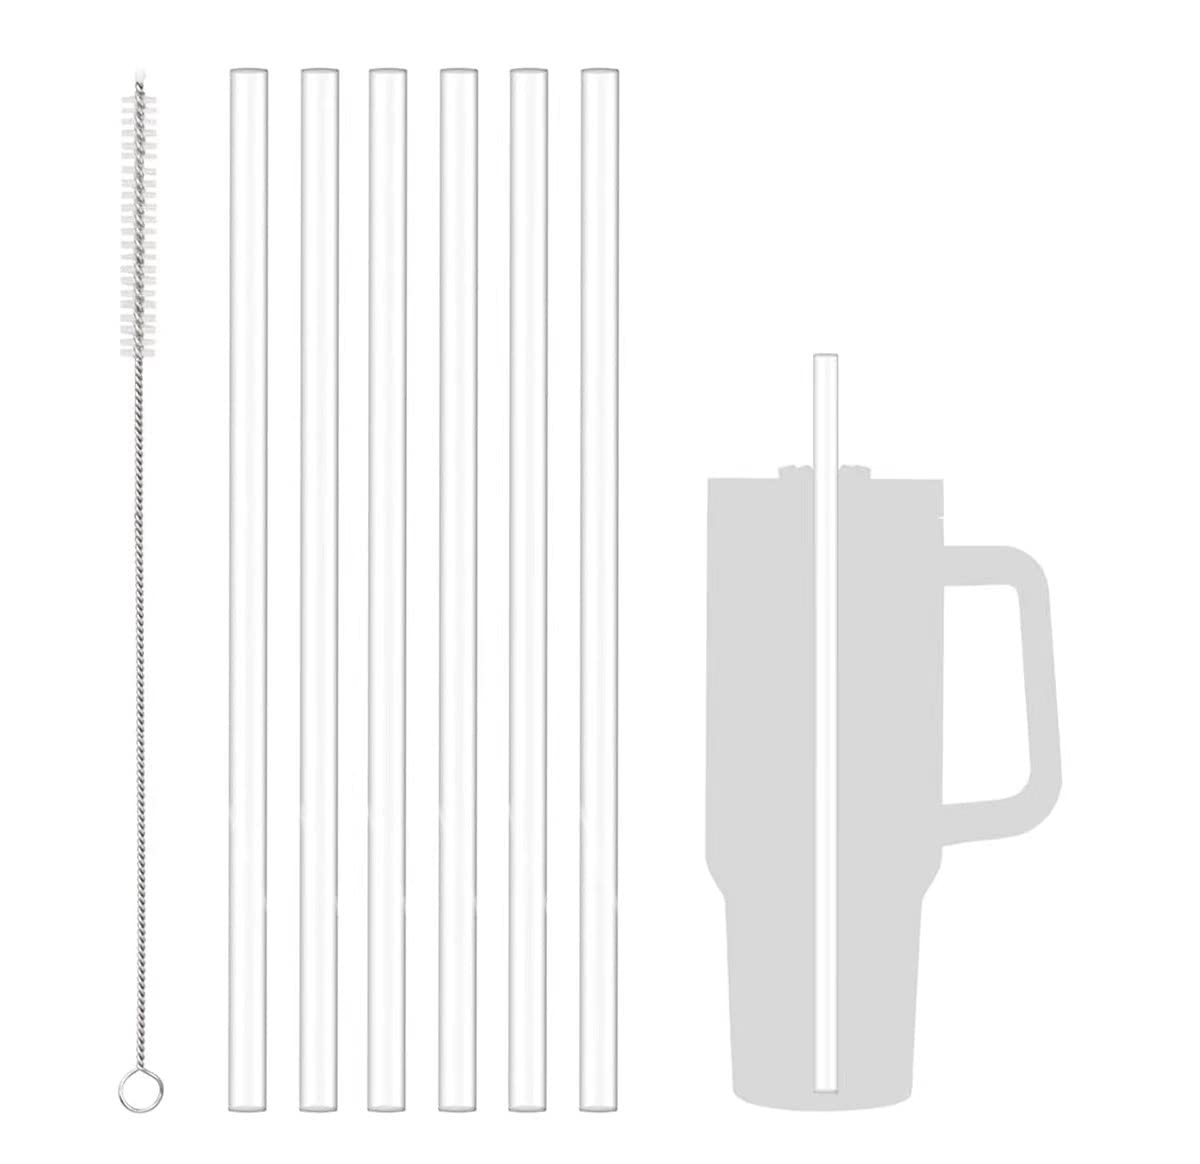 MLKSI Stainless Steel Straw Replacement for Stanley Cup Accessories, 6 Pack  Reusable Straws with Silicone Tips and Cleaning Brush for Stanley Quencher